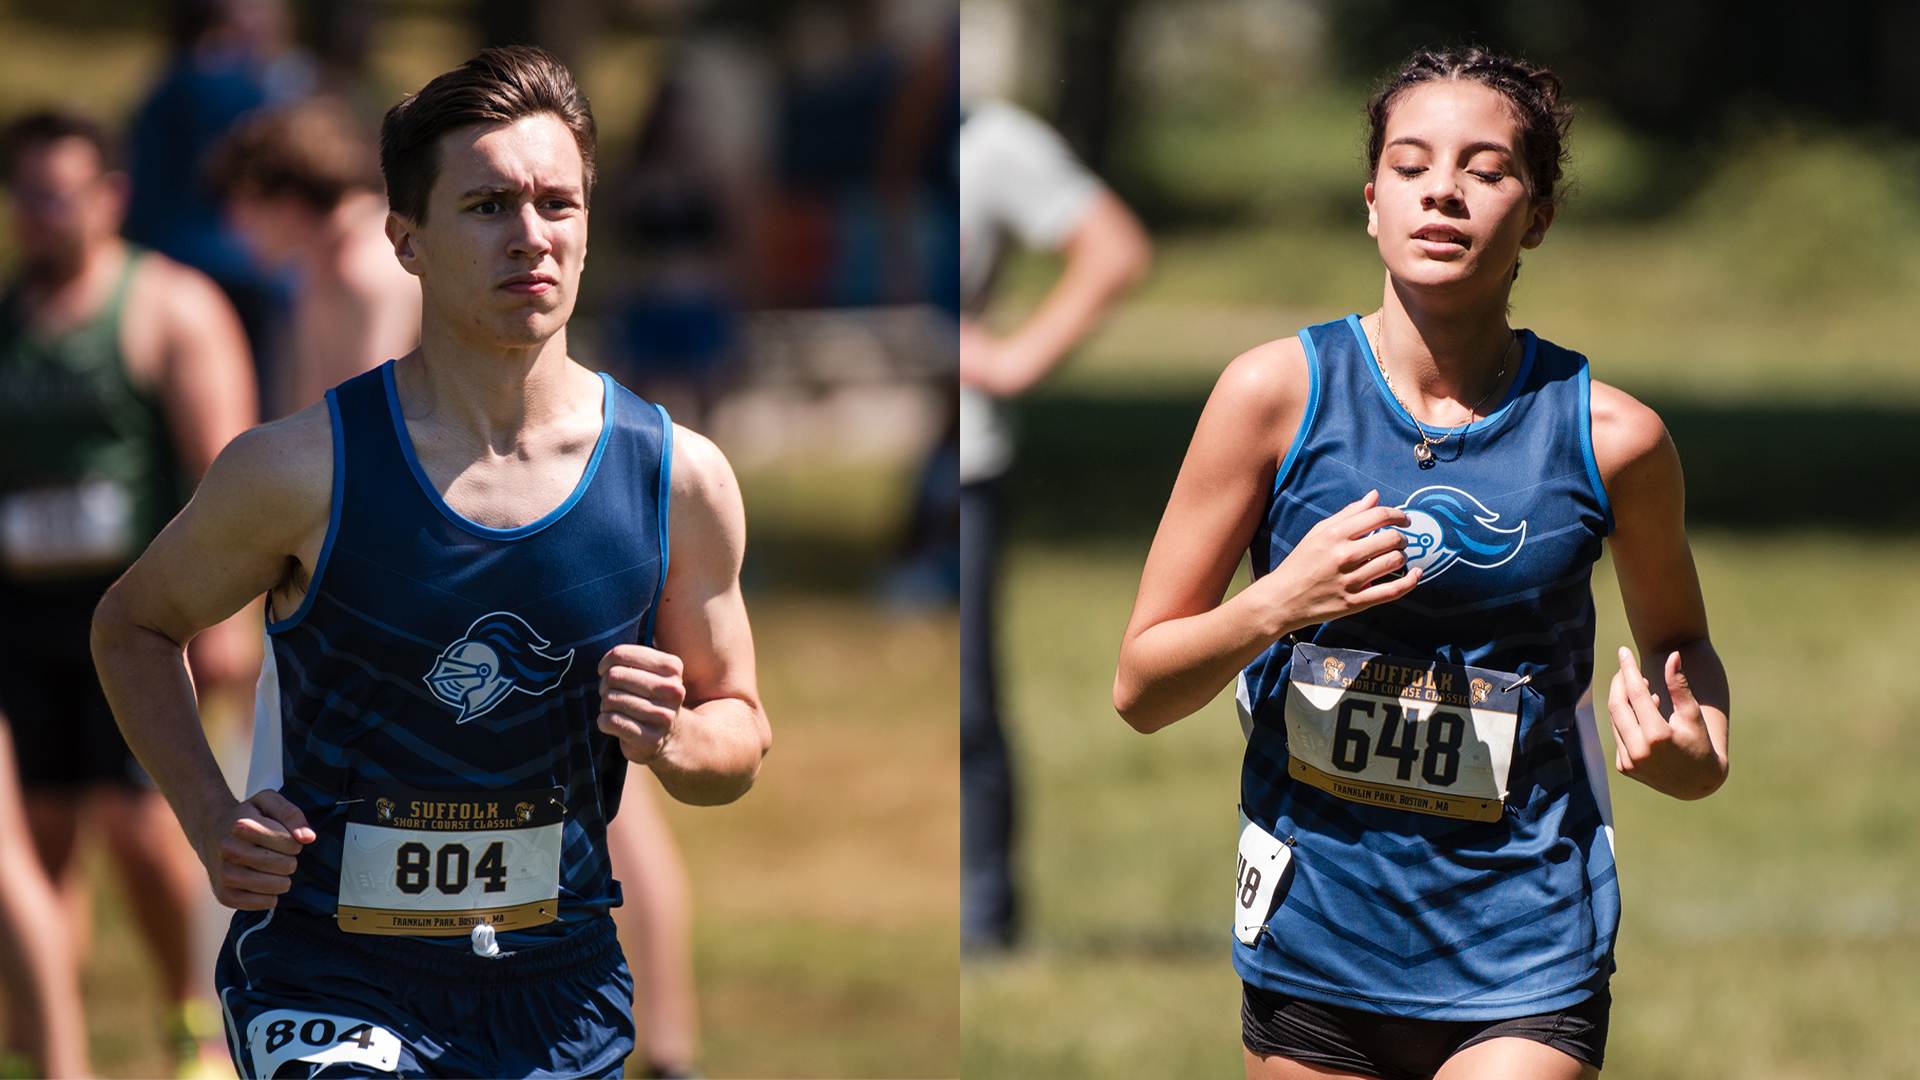 2023 Season Preview: Men’s and Women’s Cross Country